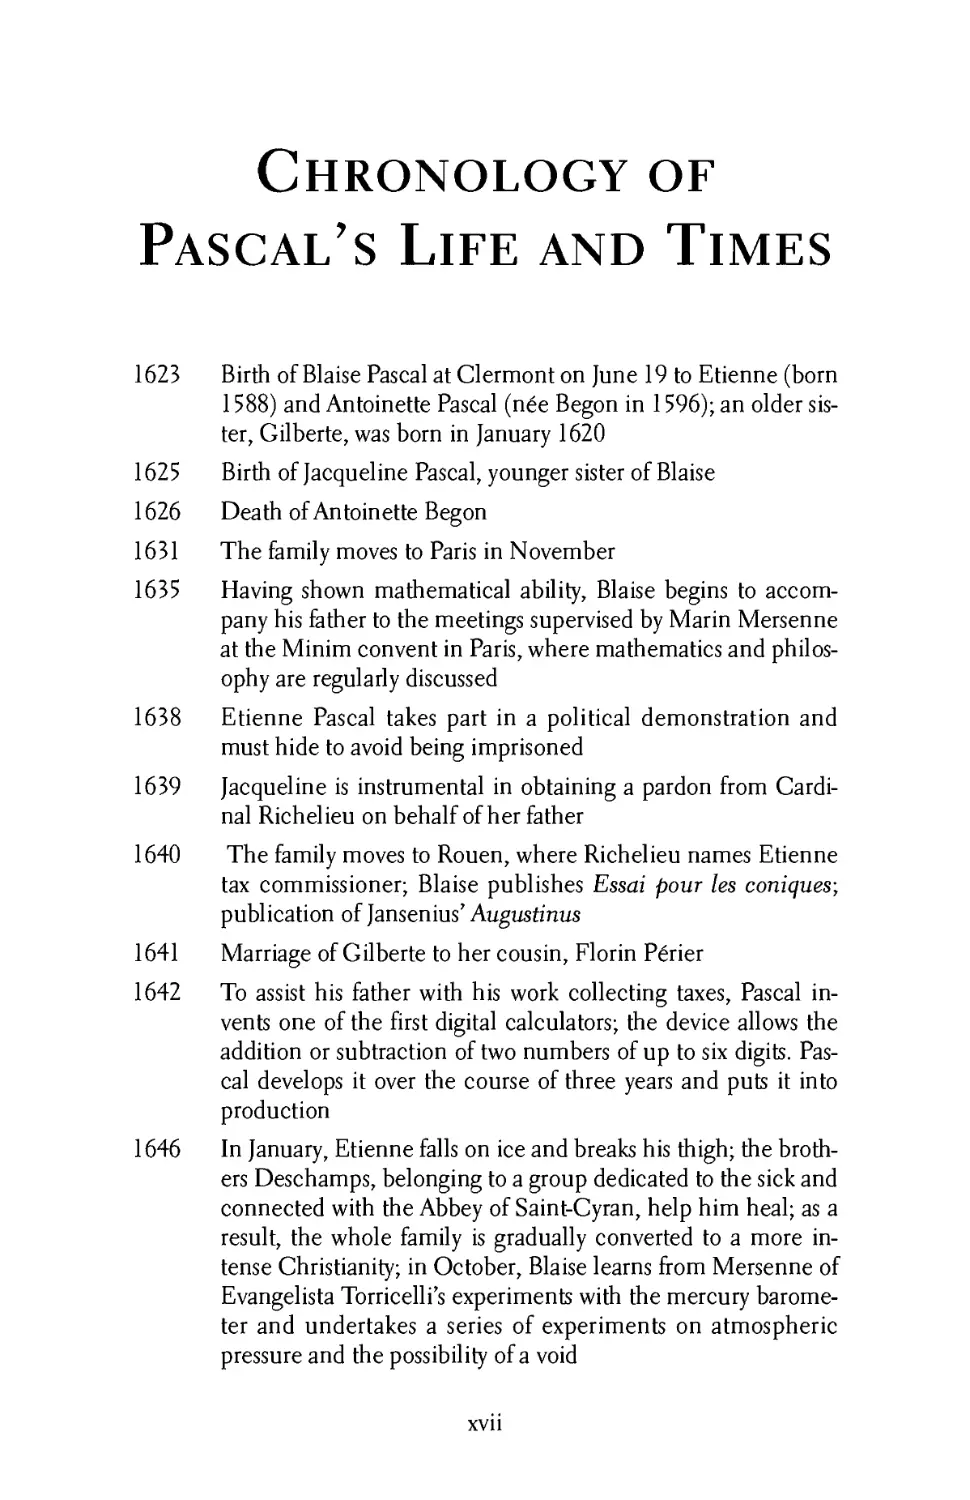 Chronology of Pascal's Life and Times